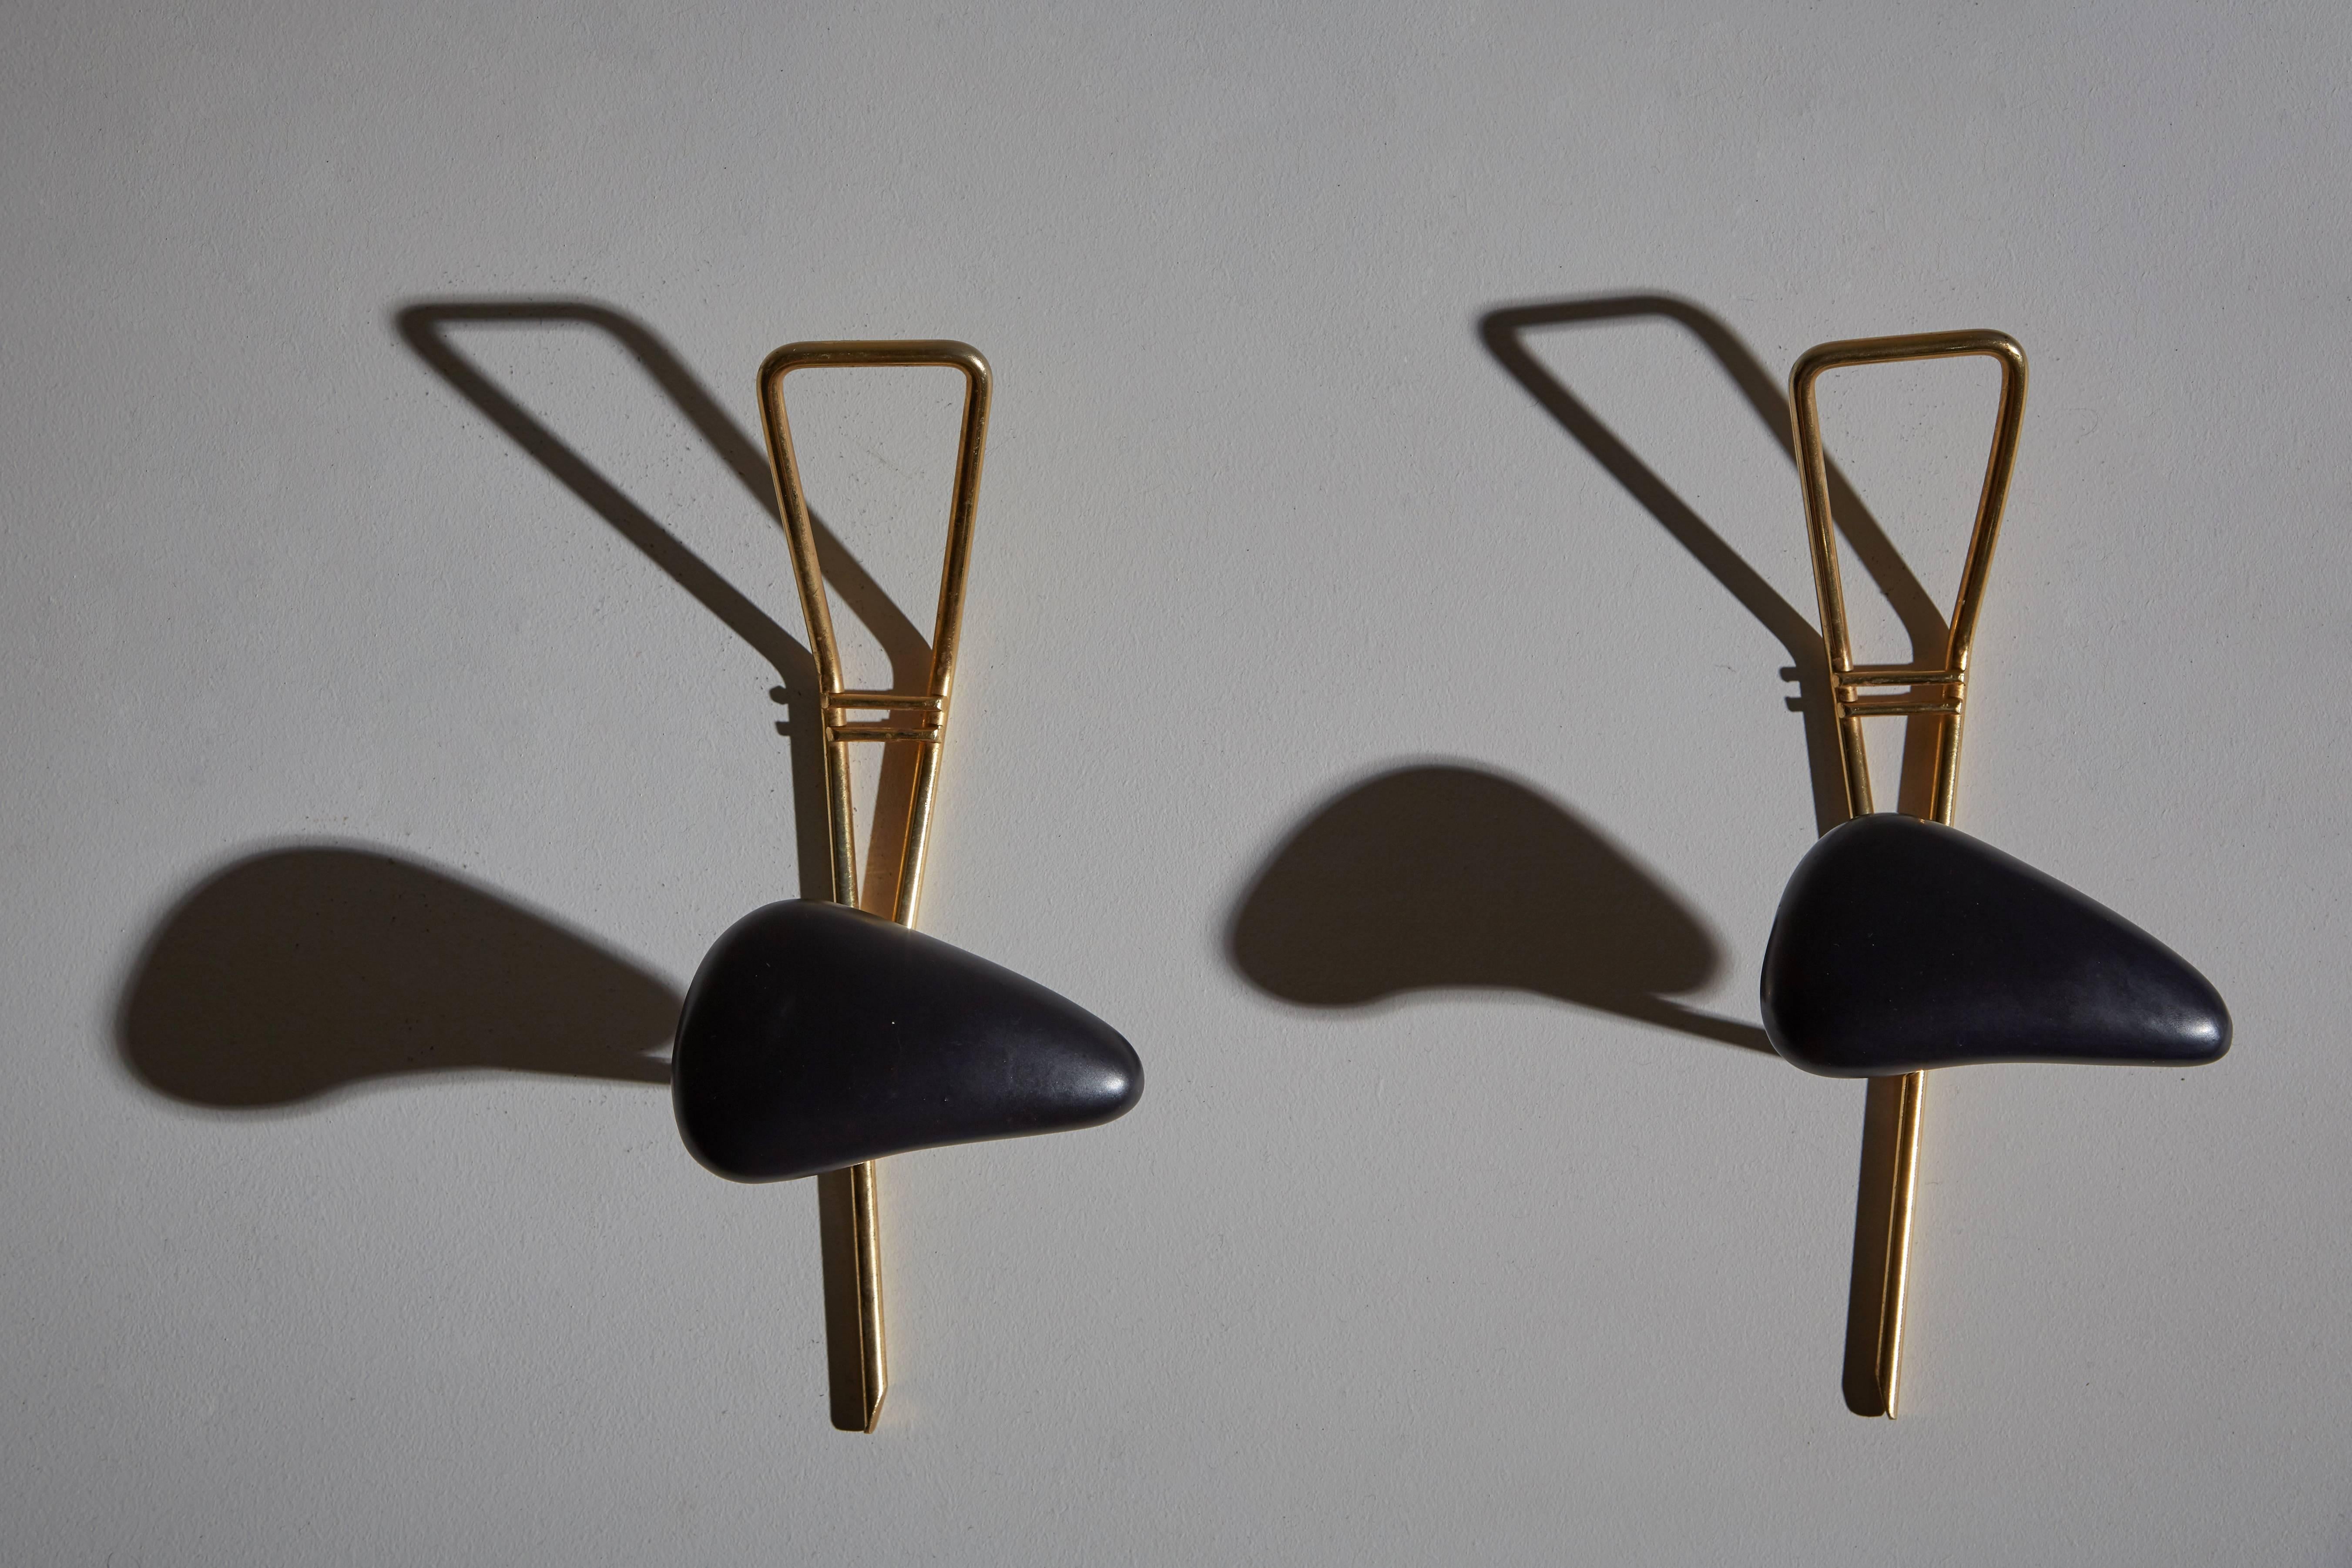 Pair of ceramic and brass wall-mounted coat racks by Georges Jouve for Marcel Asselbur. Made in France, circa 1950s.